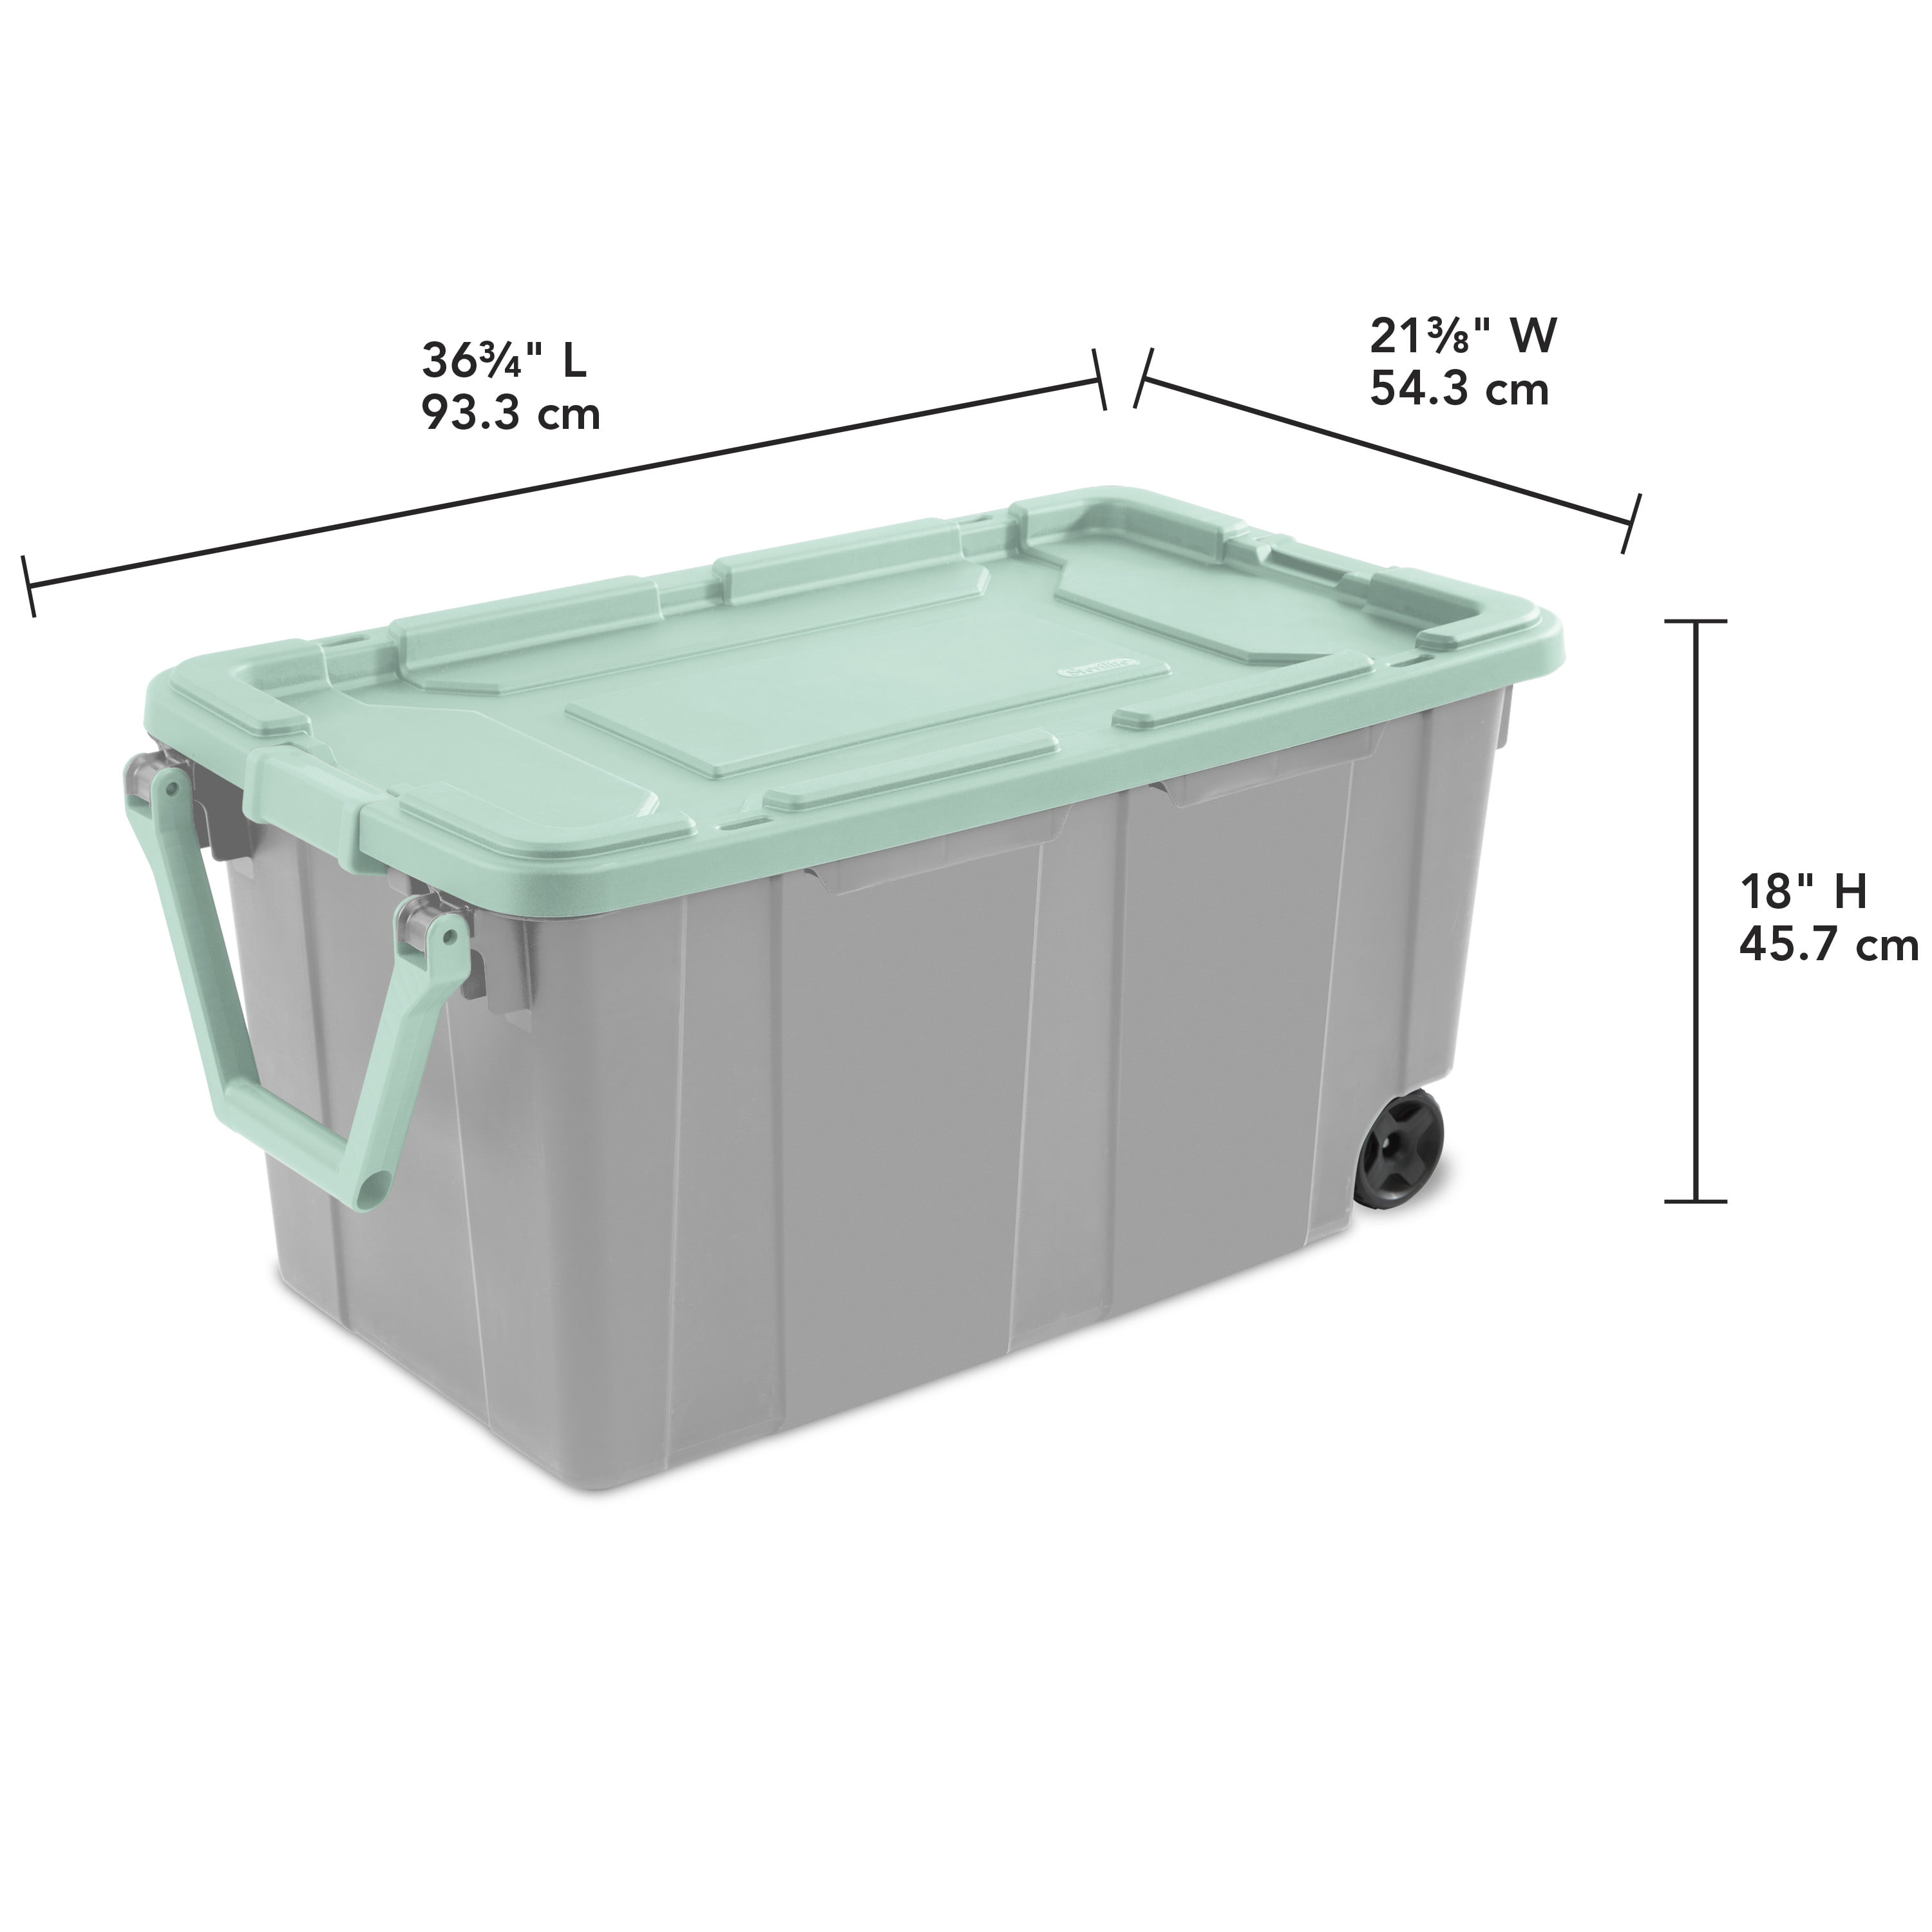 40 Gallon Rolling Plastic Storage Boxes Bins Totes Large